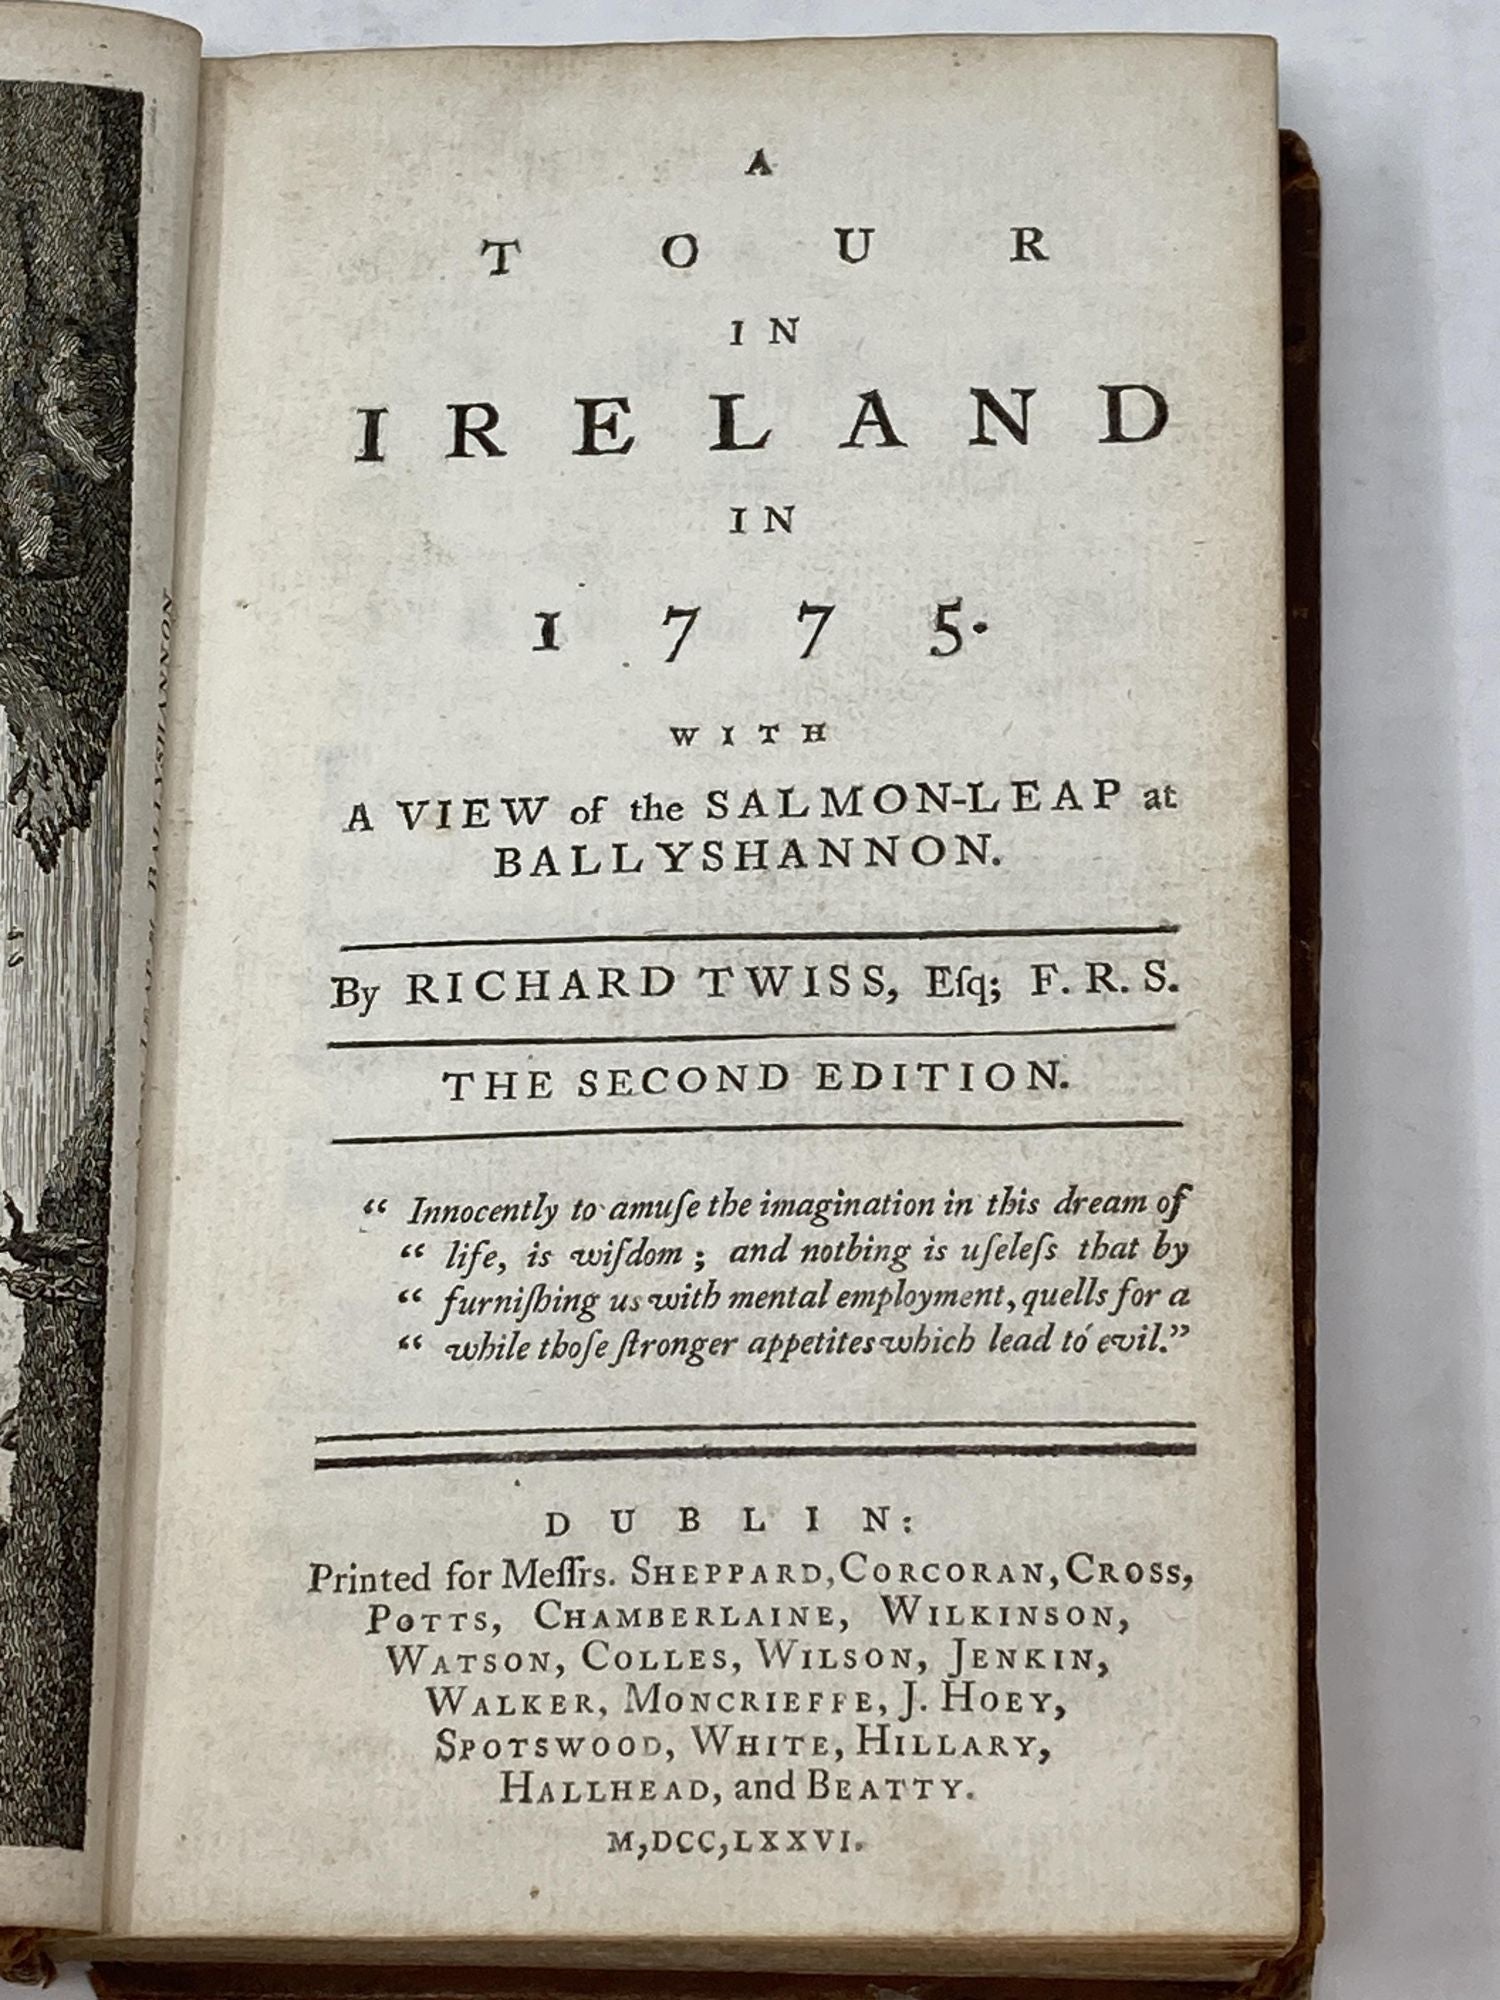 Twiss, Richard - A Tour in Ireland in 1775 with a View of the Salmon Leap at Ballyshannon